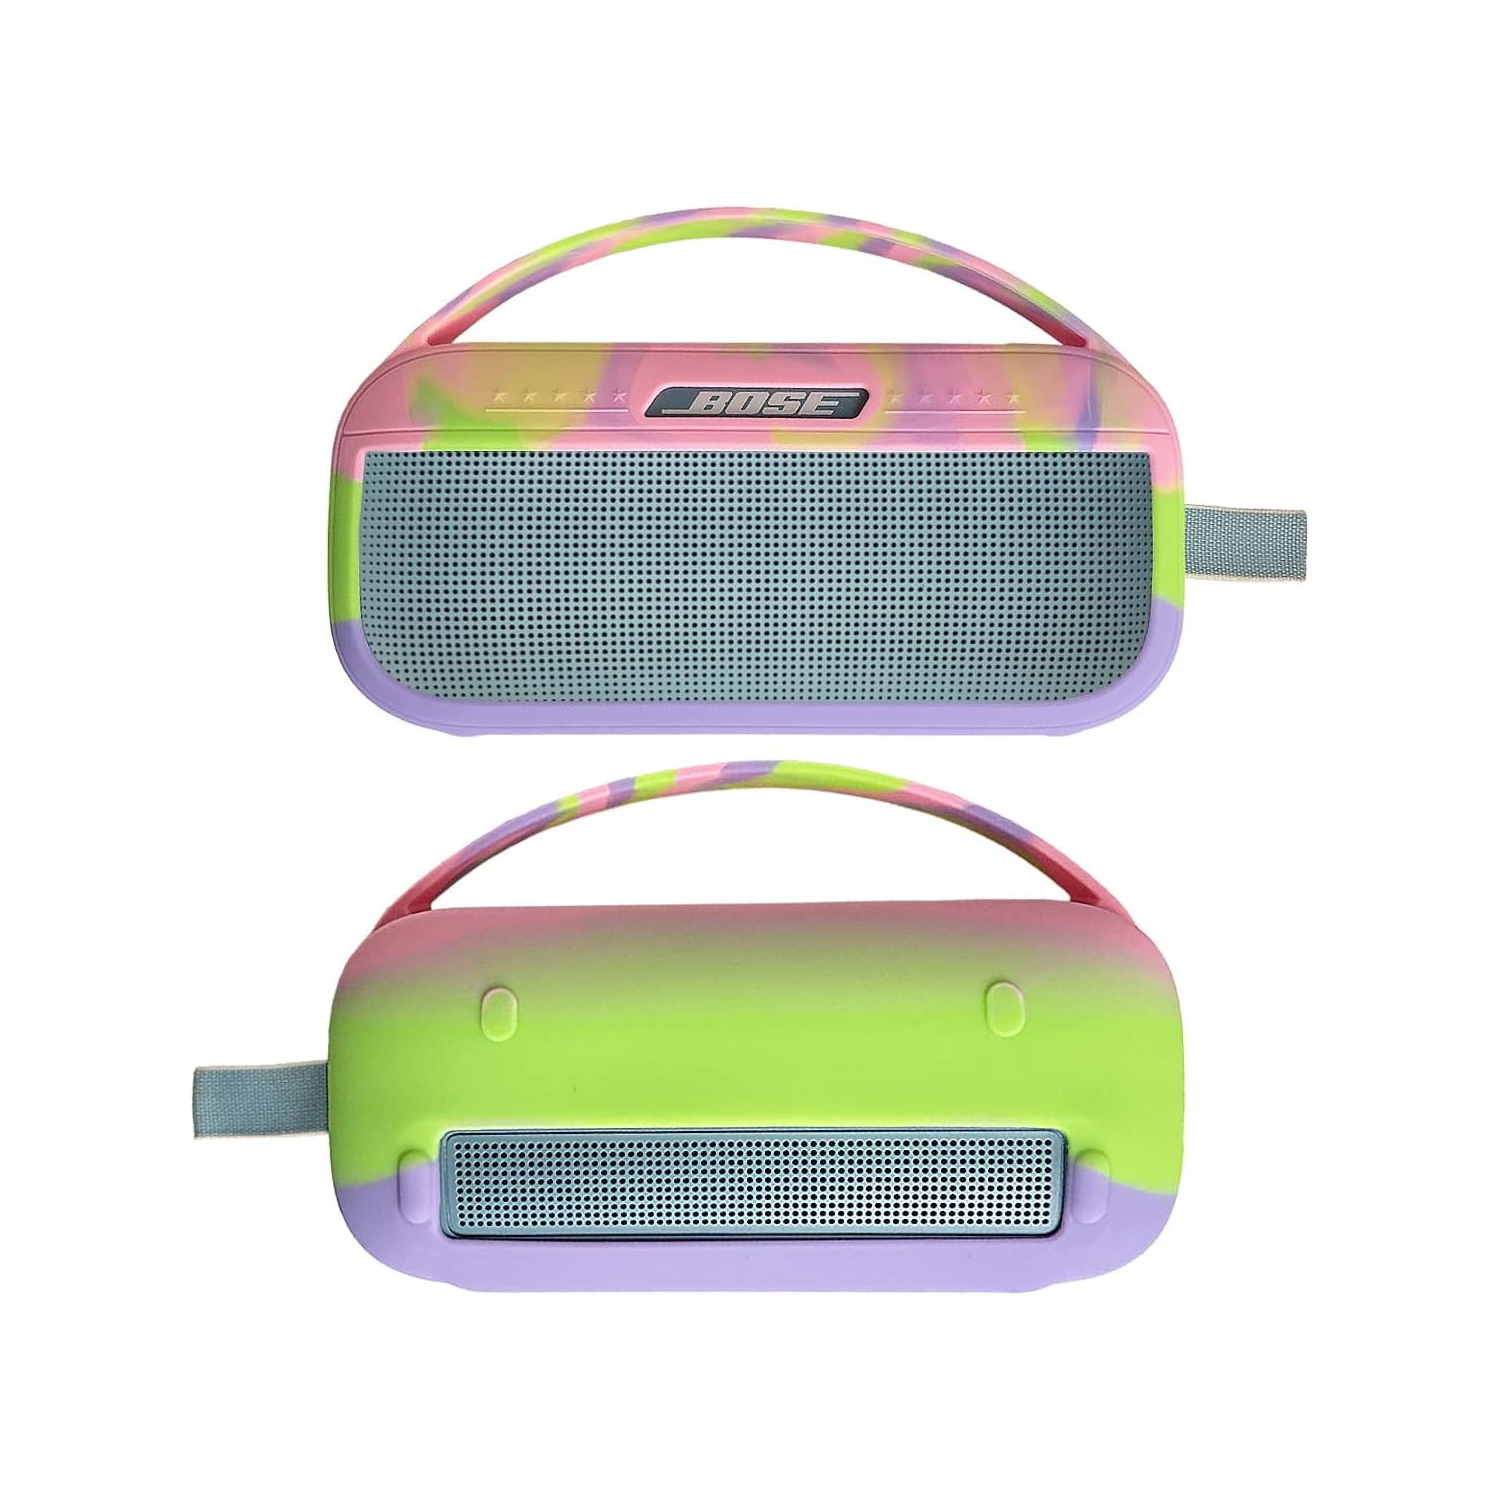 Colorful Silicone Cover Case for for Bose SoundLink Flex Bluetooth Portable Speaker, Protective Skin Sleeve for Bose